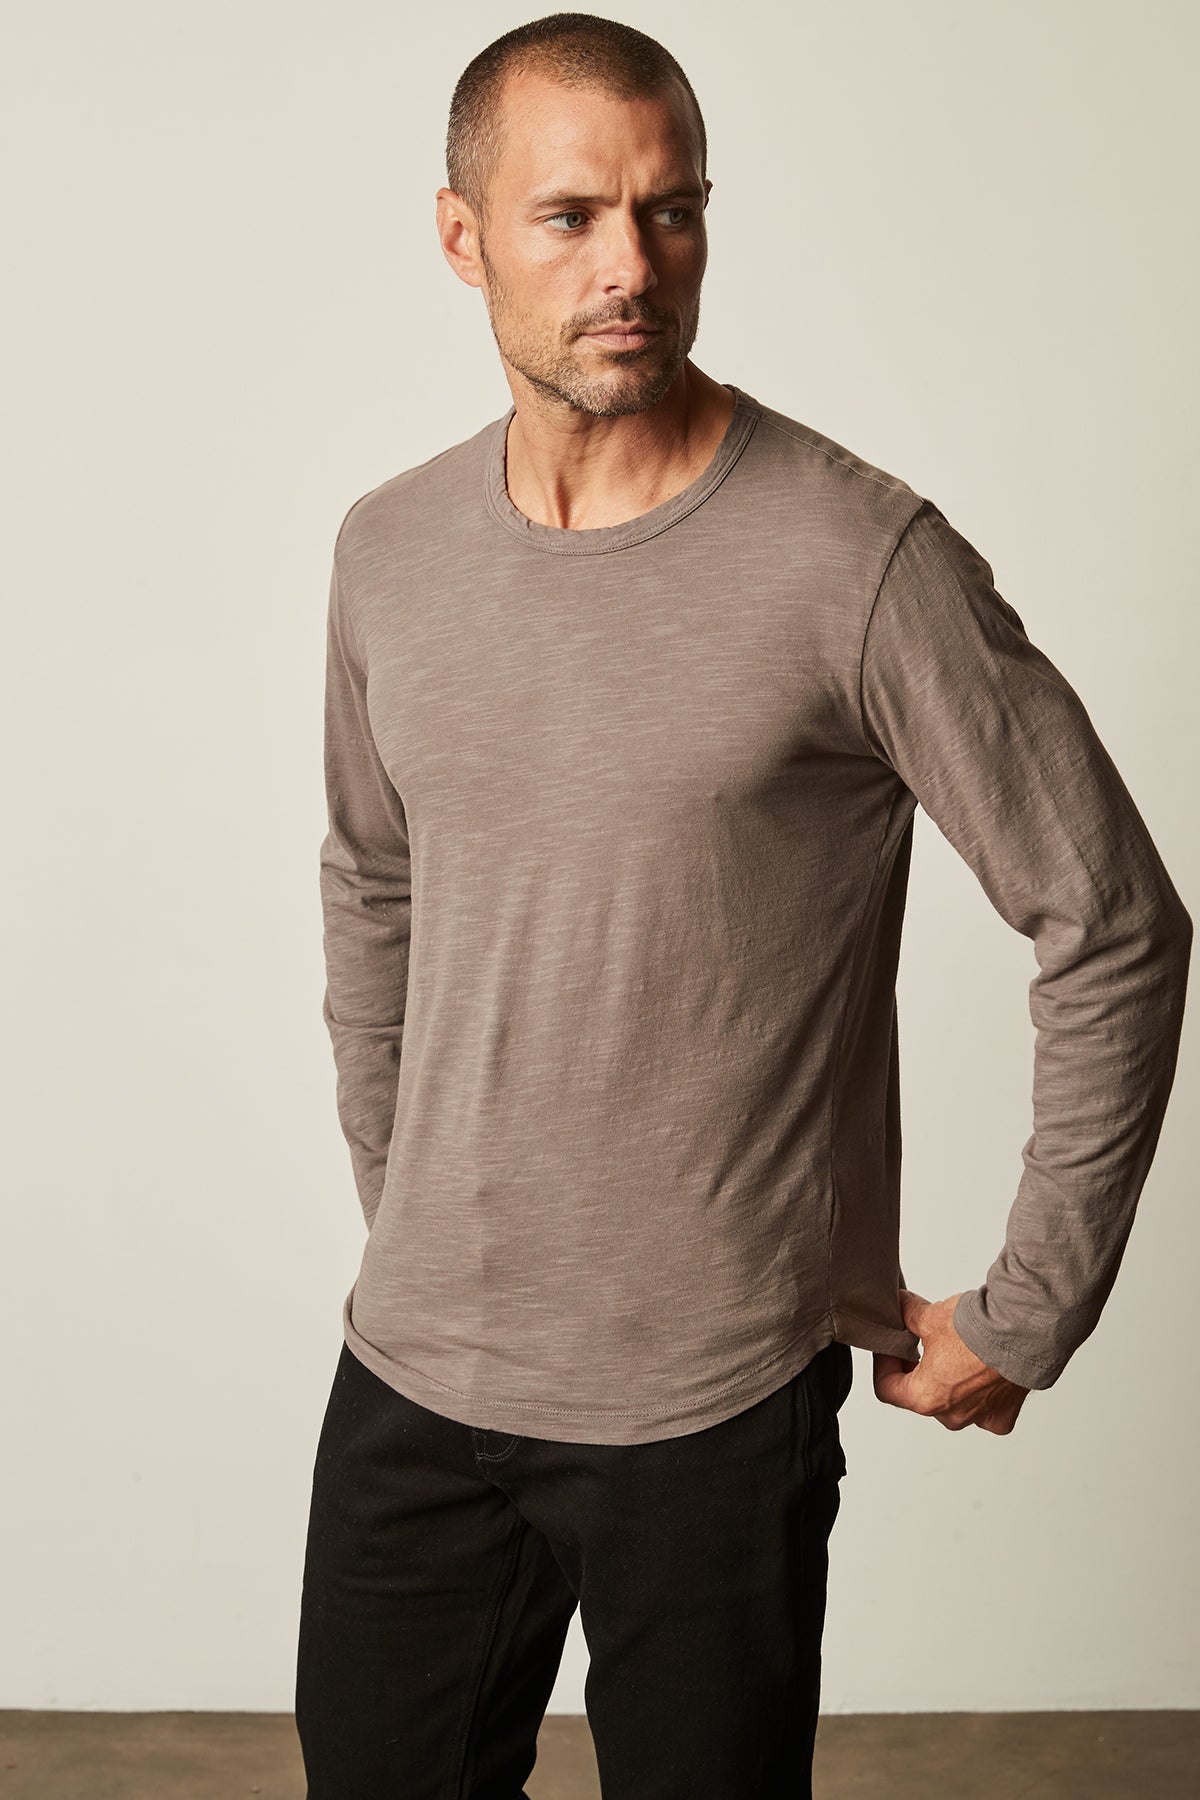 A man wearing a Velvet by Graham & Spencer KAI CREW NECK TEE, an ideal layering piece with a vintage-feel slub knit long sleeve t-shirt.-25793842315457